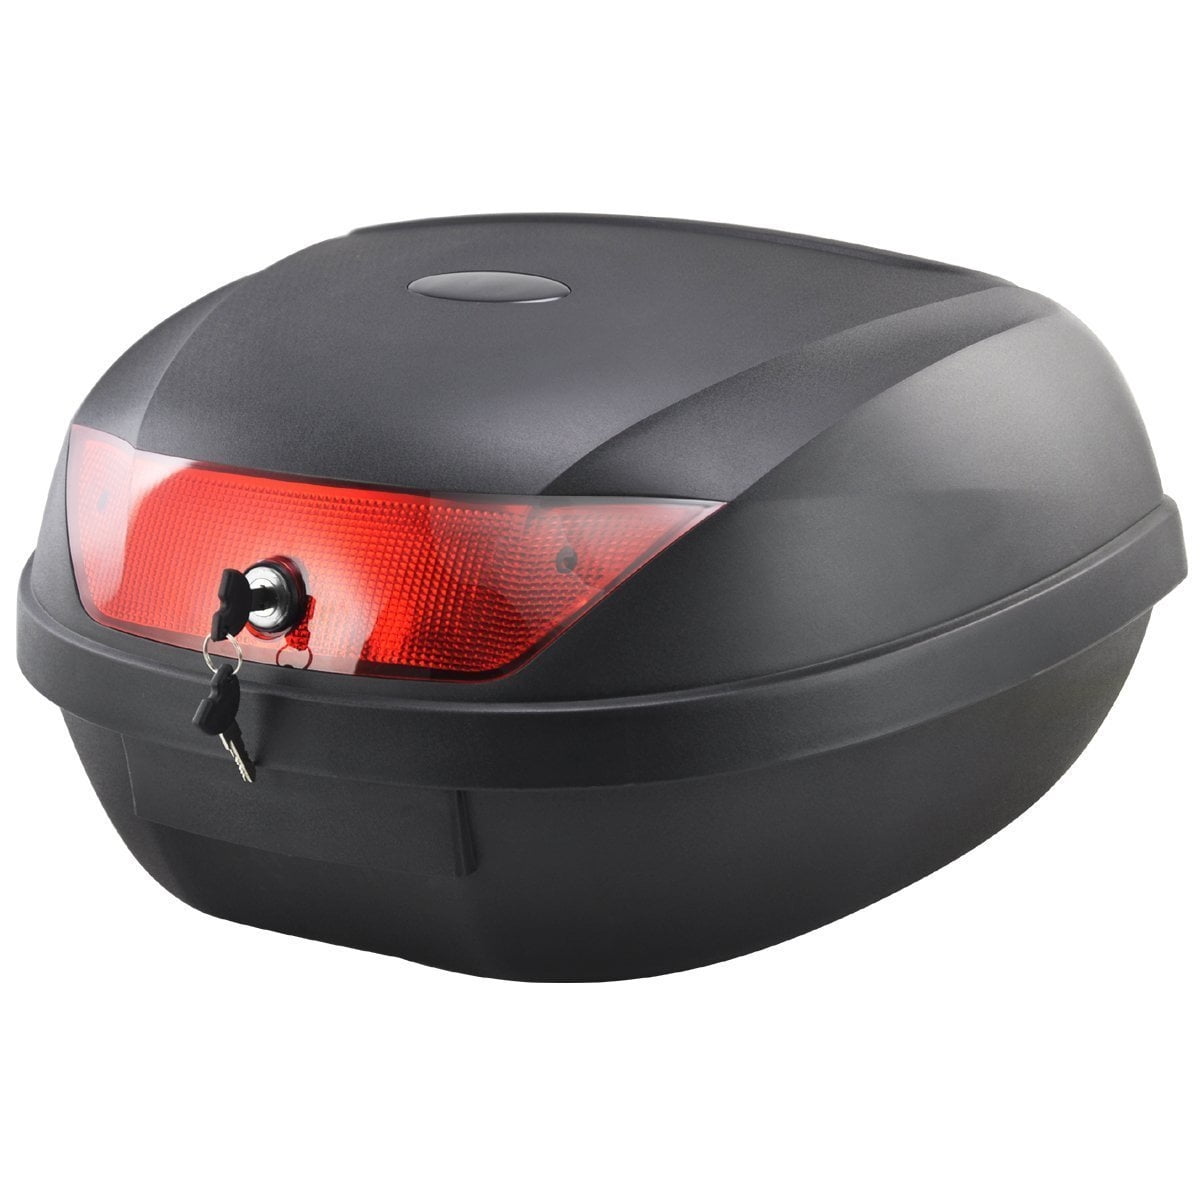 JKGHK Rectangle Motorcycle Top Box Red Night Warning Light and Security Lock Trunk Top Case with Universal Mounting Hardware Scooter Helmet Trunk Tail Box 